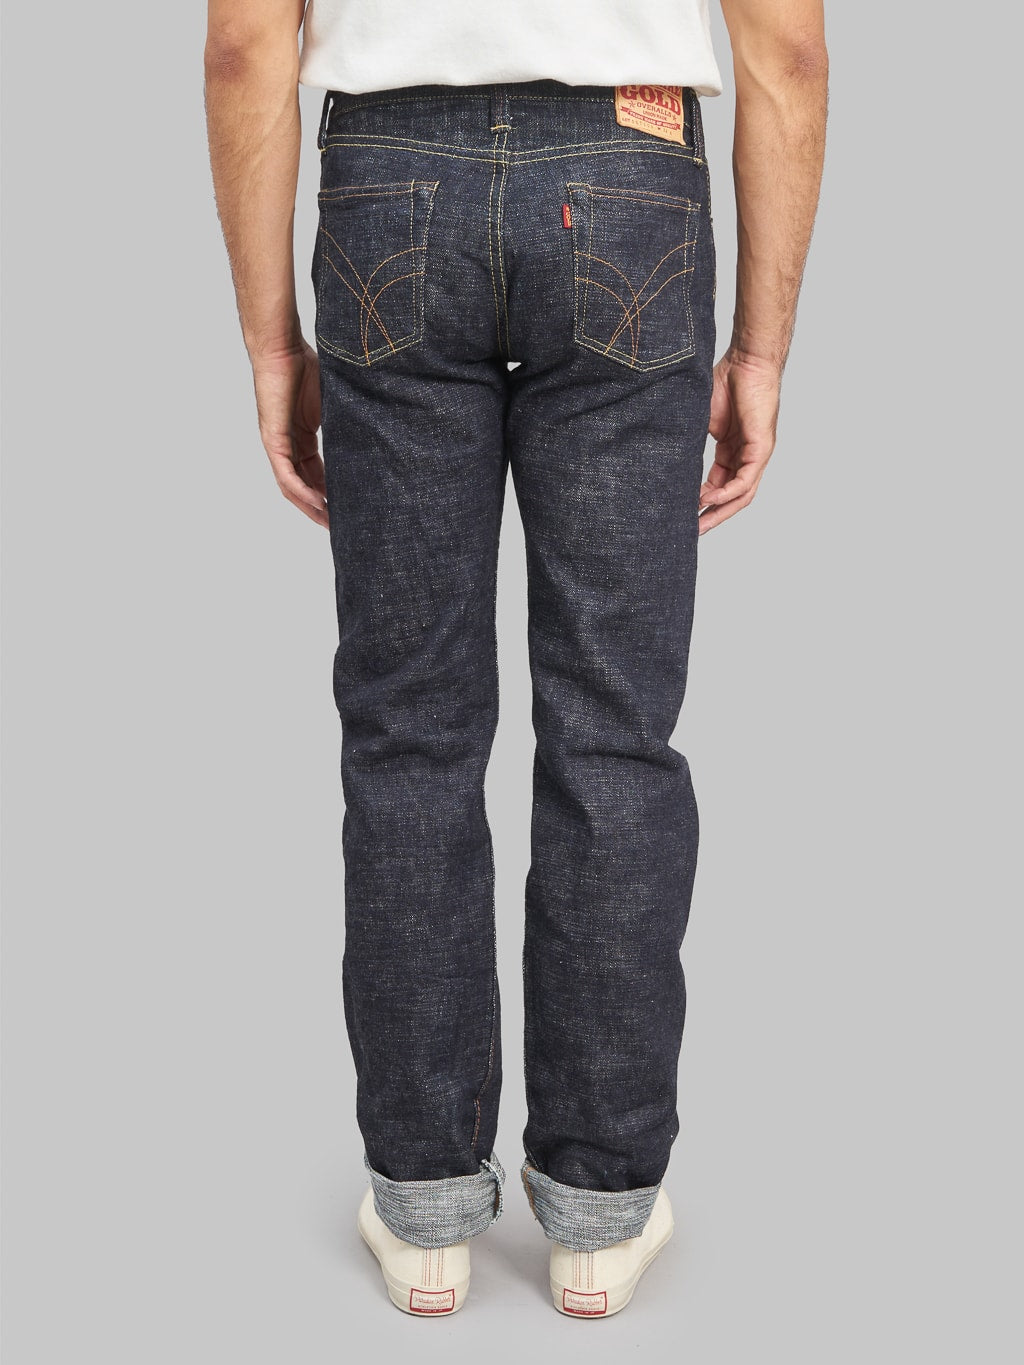 the strike gold 7104 ultra slubby straight tapered jeans  back fit